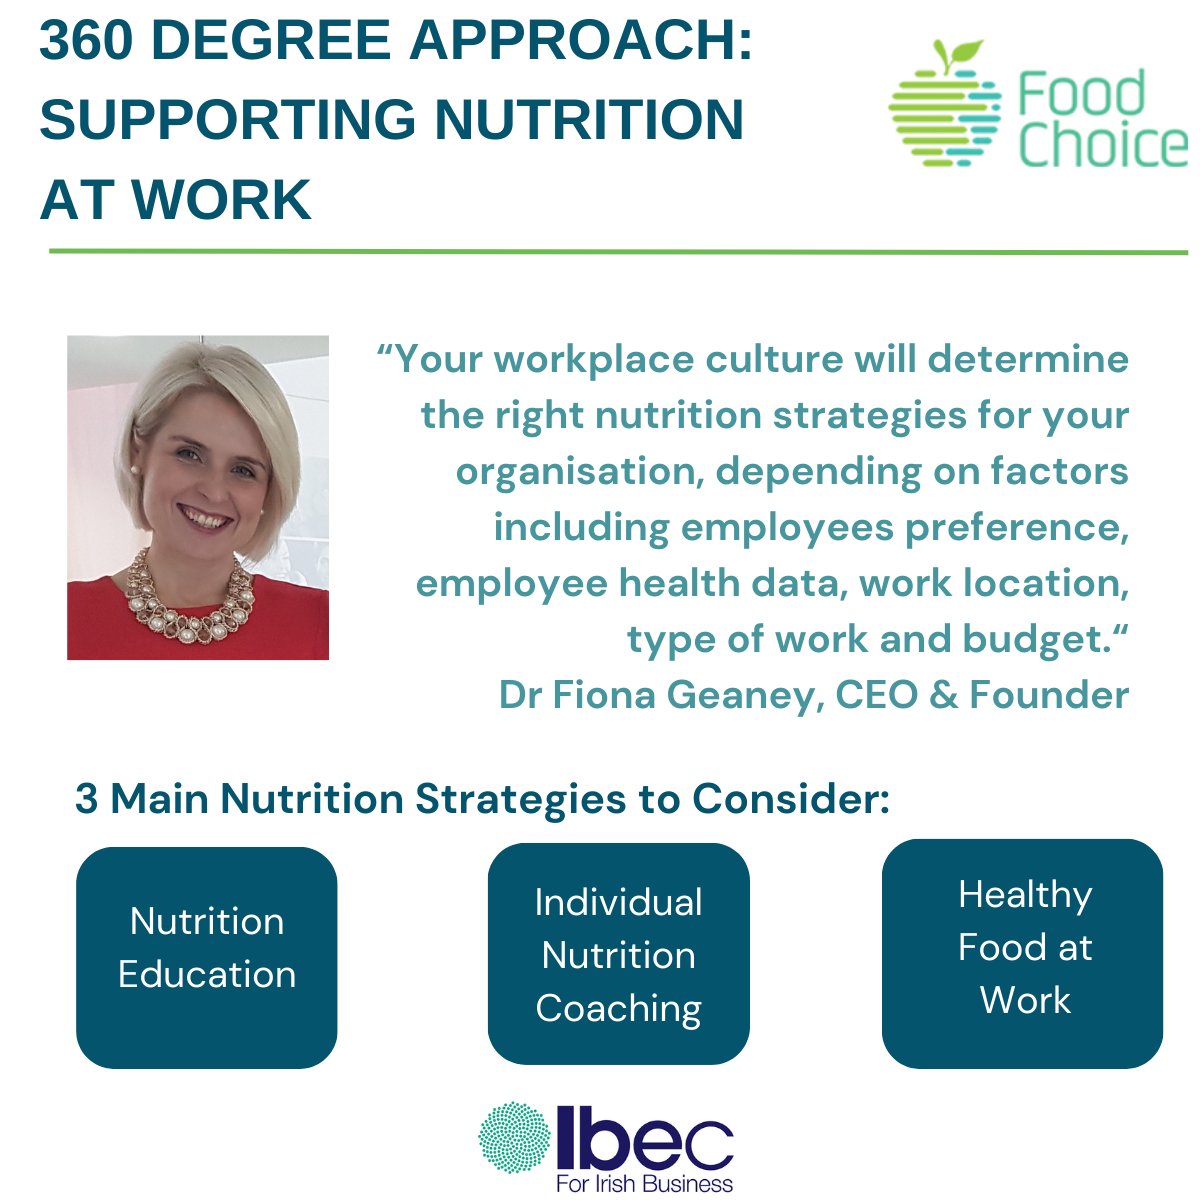 Our Founder @f_geaney was delighted to write an article for @ibec and @IbecKeepWell exploring the shifting workplace environment and shares her advice to employers on promoting healthy nutrition at work. Check out Fiona's article here: ow.ly/659050Q05Qk #nutritionatwork